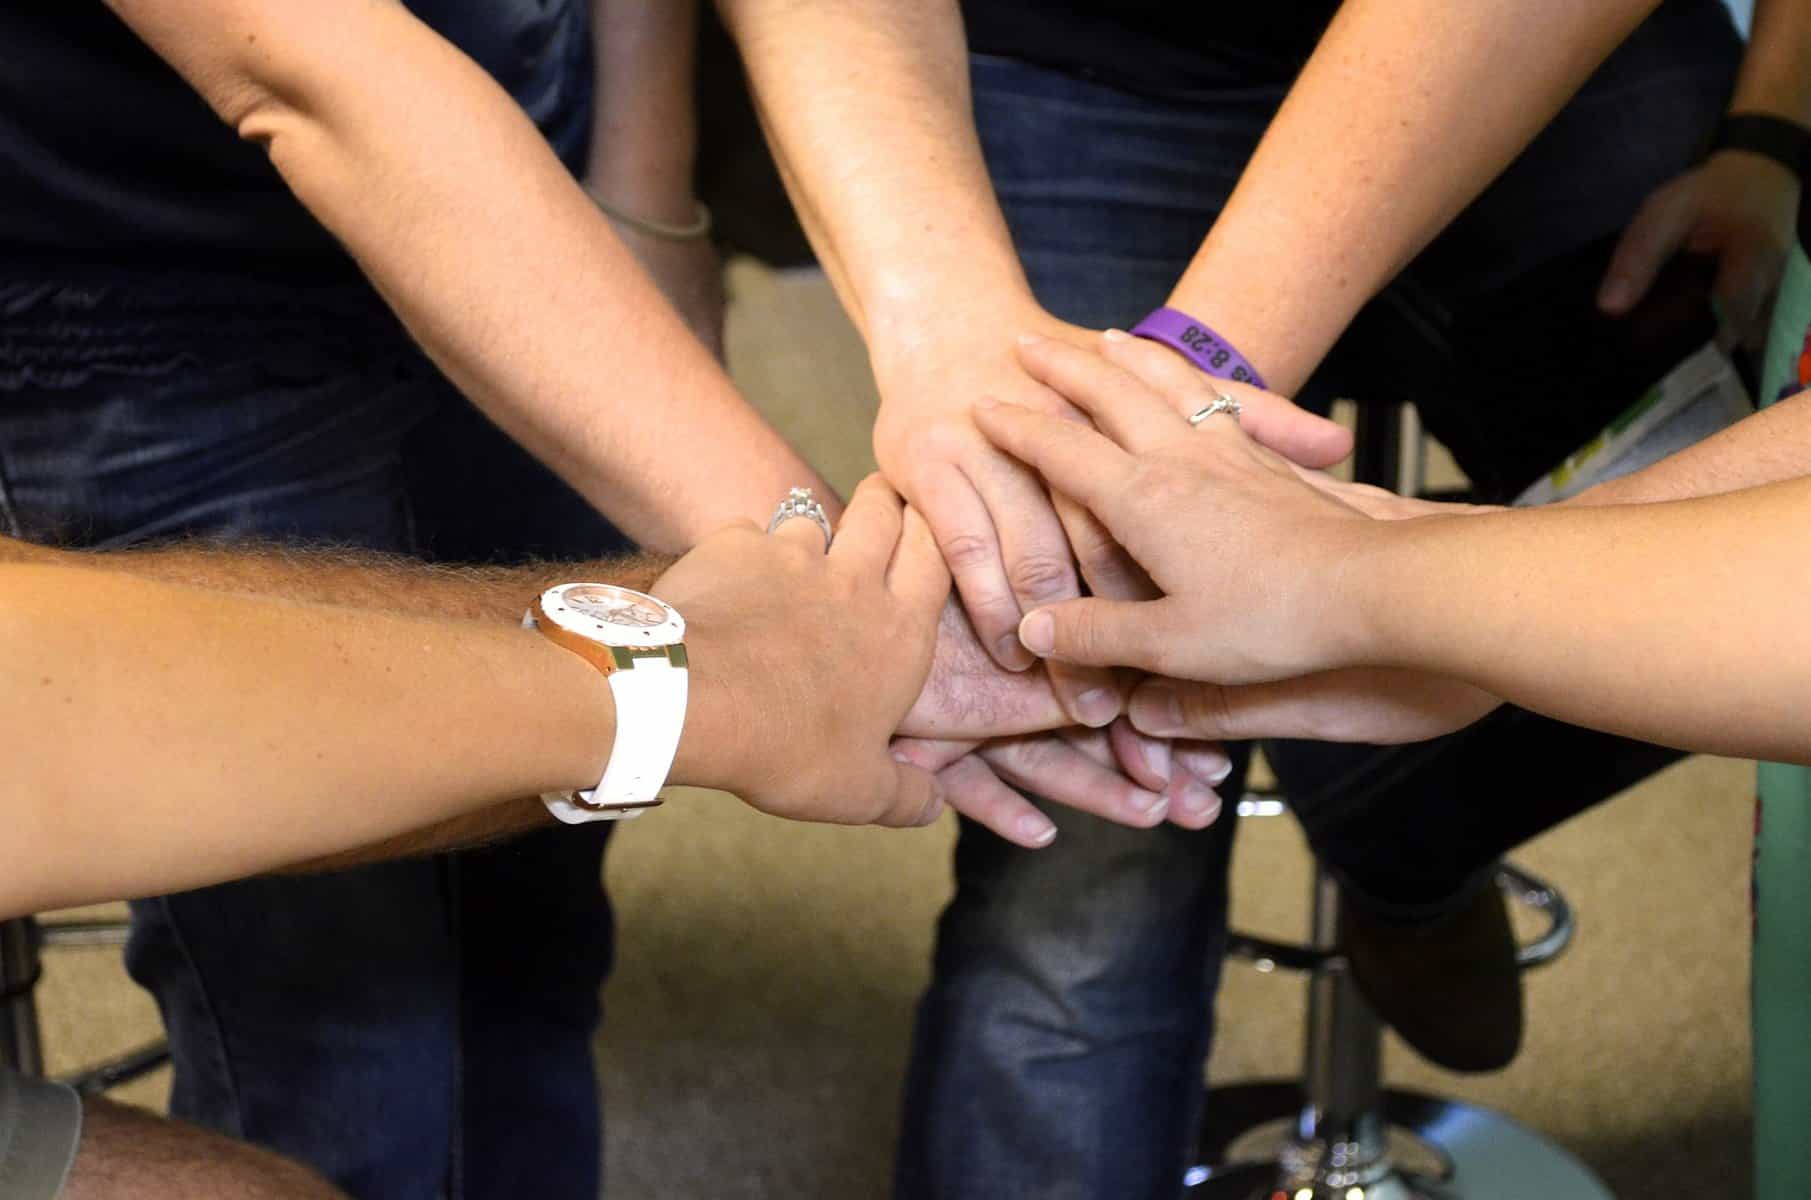 The hands pf people gathered in a circle are shown stacked together.